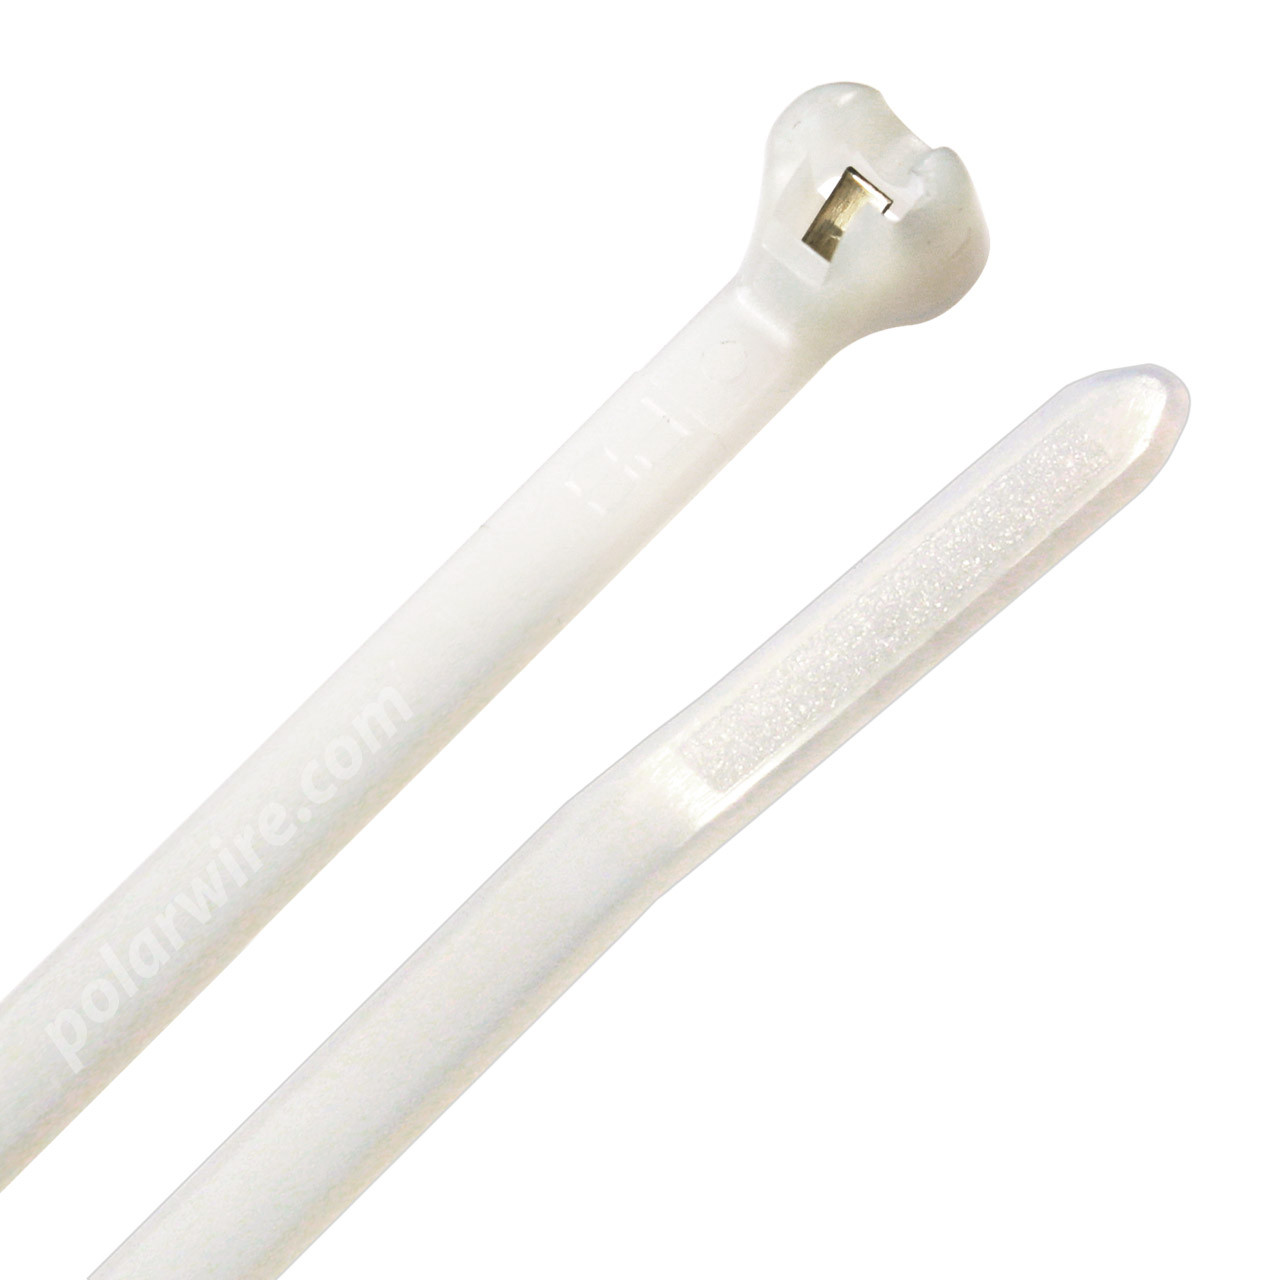 14.3 Inch NATURAL NYLON CABLE TIE, 40lb Pull, 100 Qty, Heat Stabilized, Steel Locking Barb